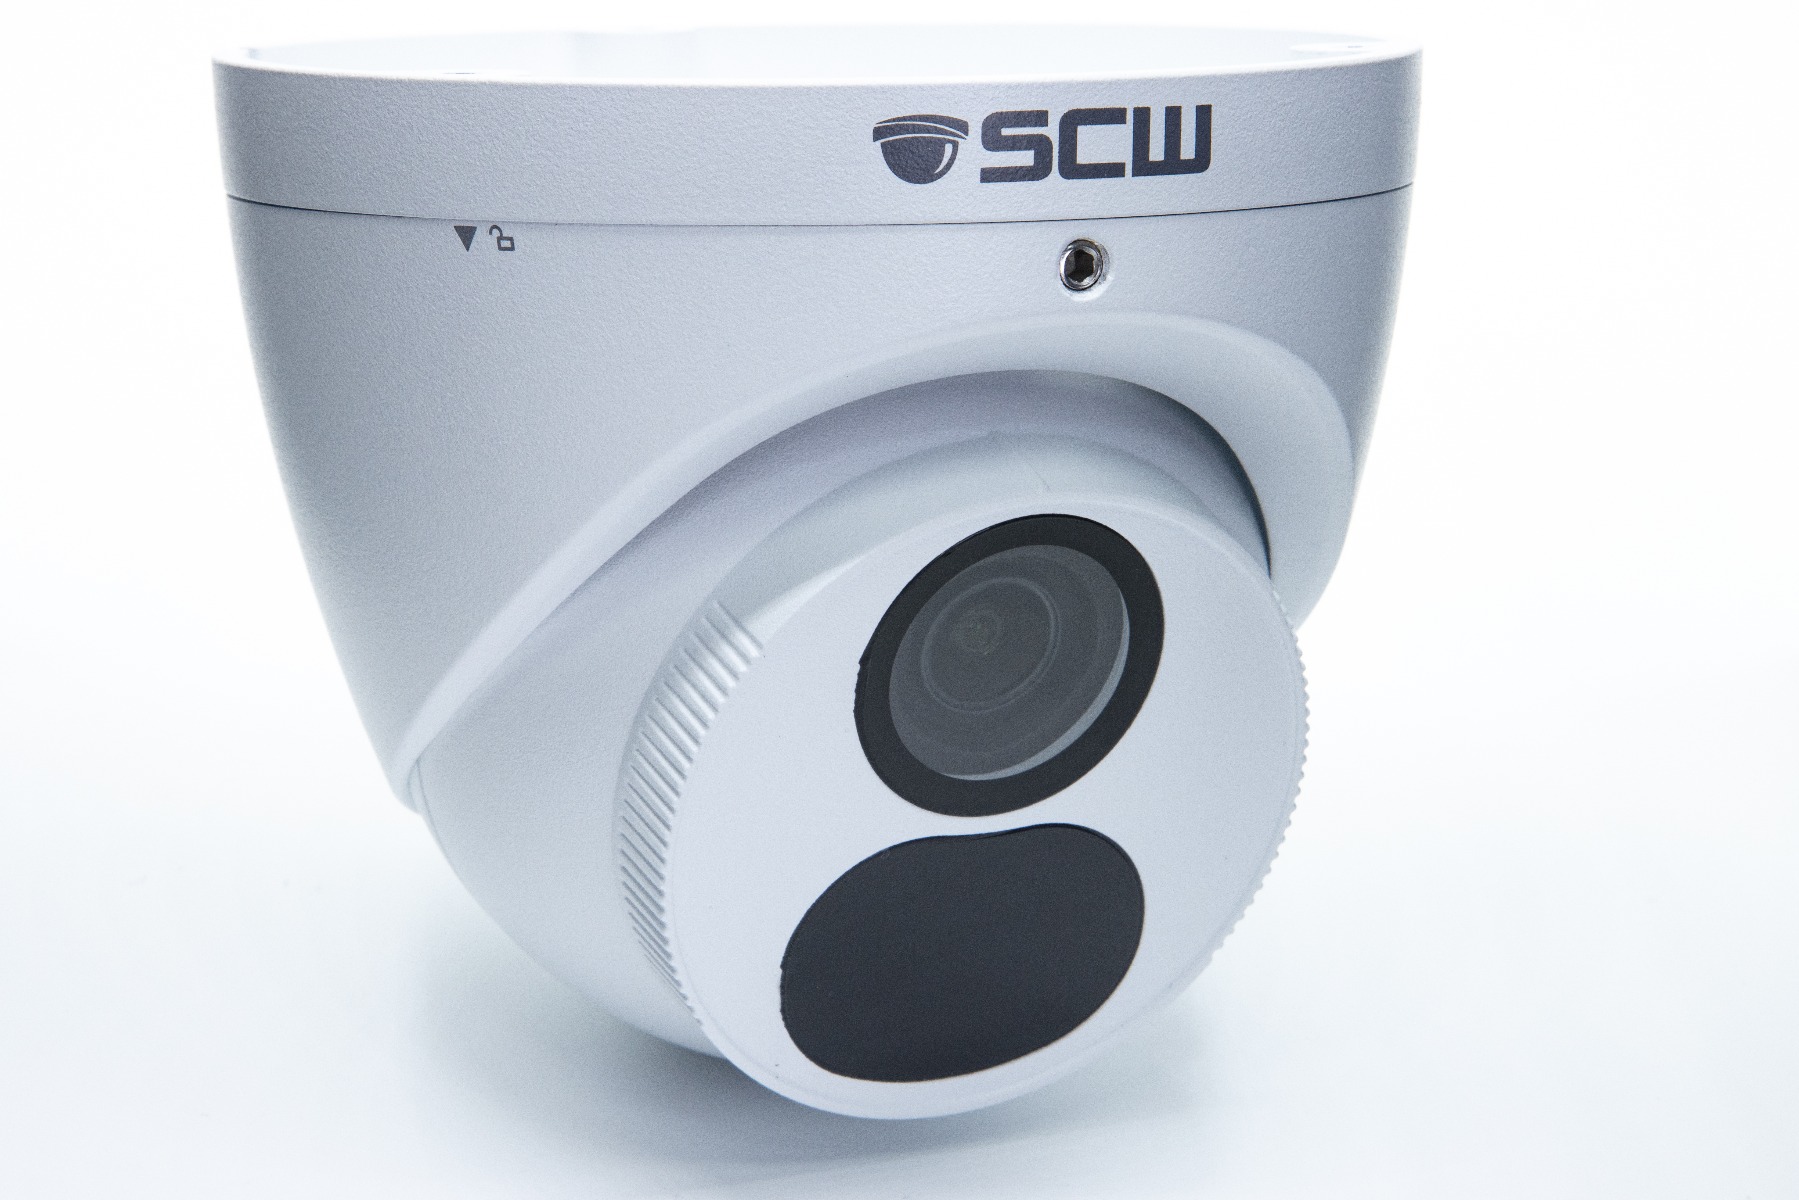 DISCONTINUED - The Deputy 2.0 v2 - 26DF2M - 2MP (1080P) Fixed Wide Angle Lens Turret Dome Camera